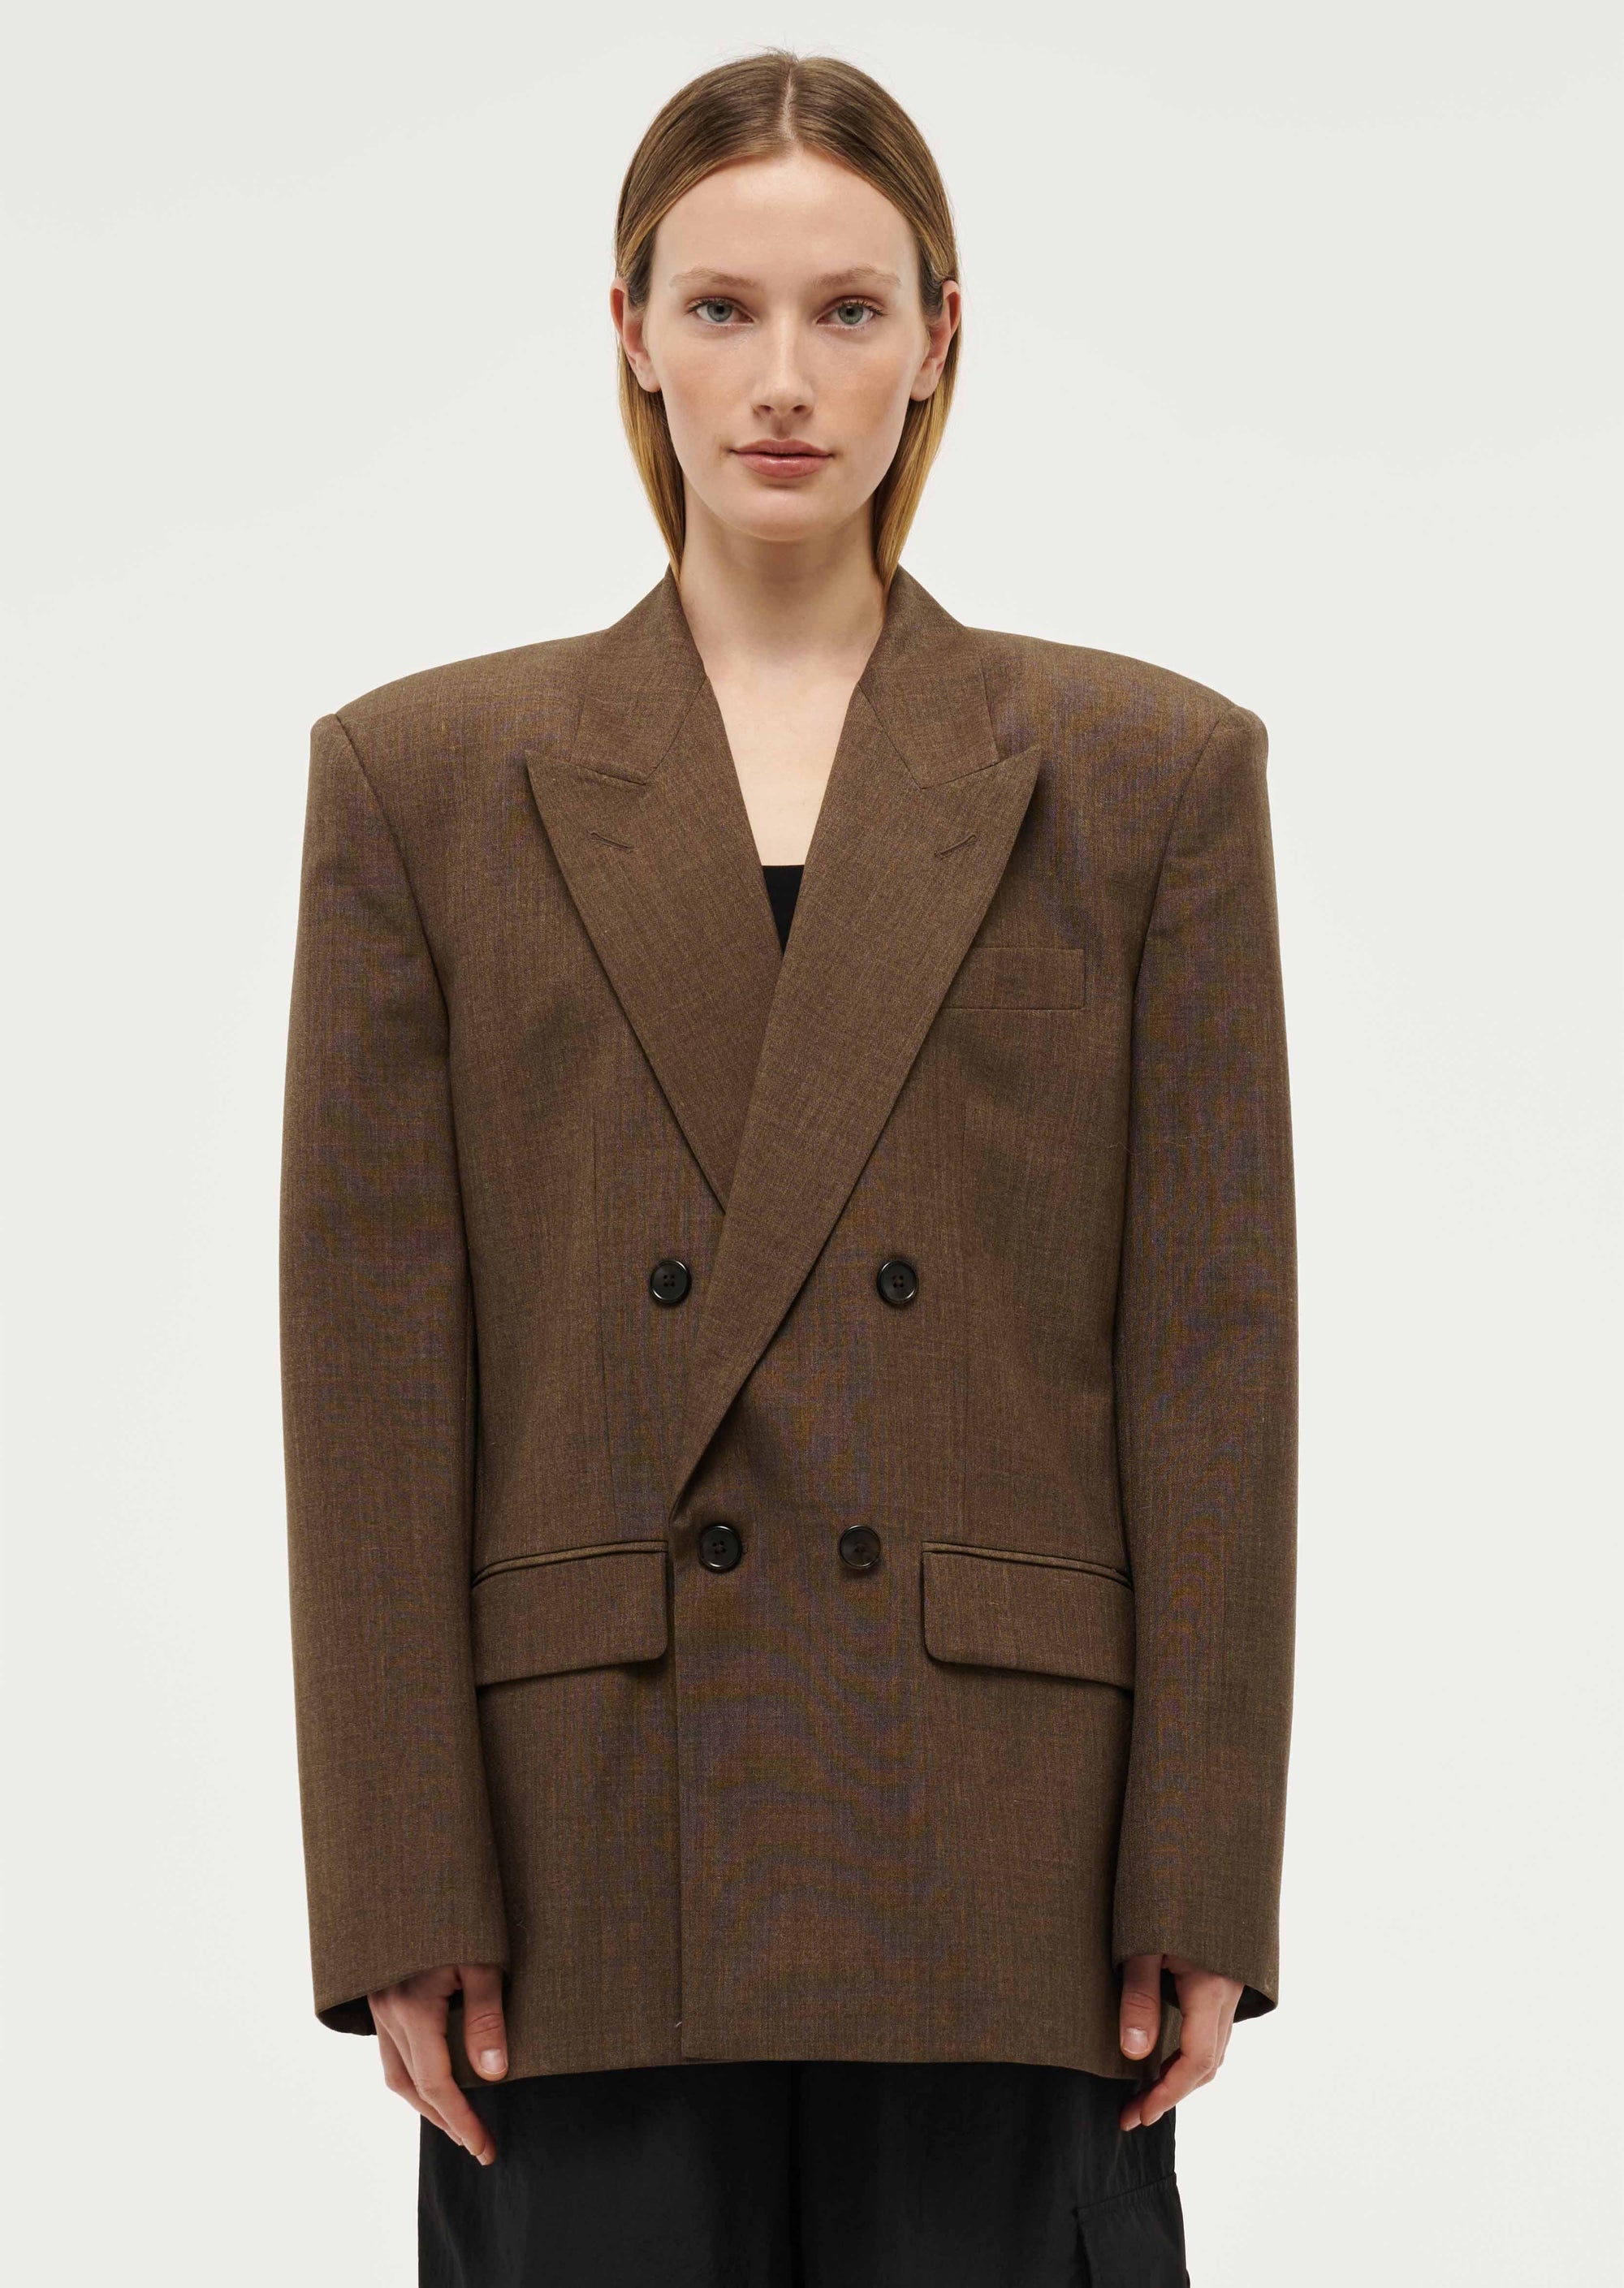 The Tribute Blazer - Taupe Brown